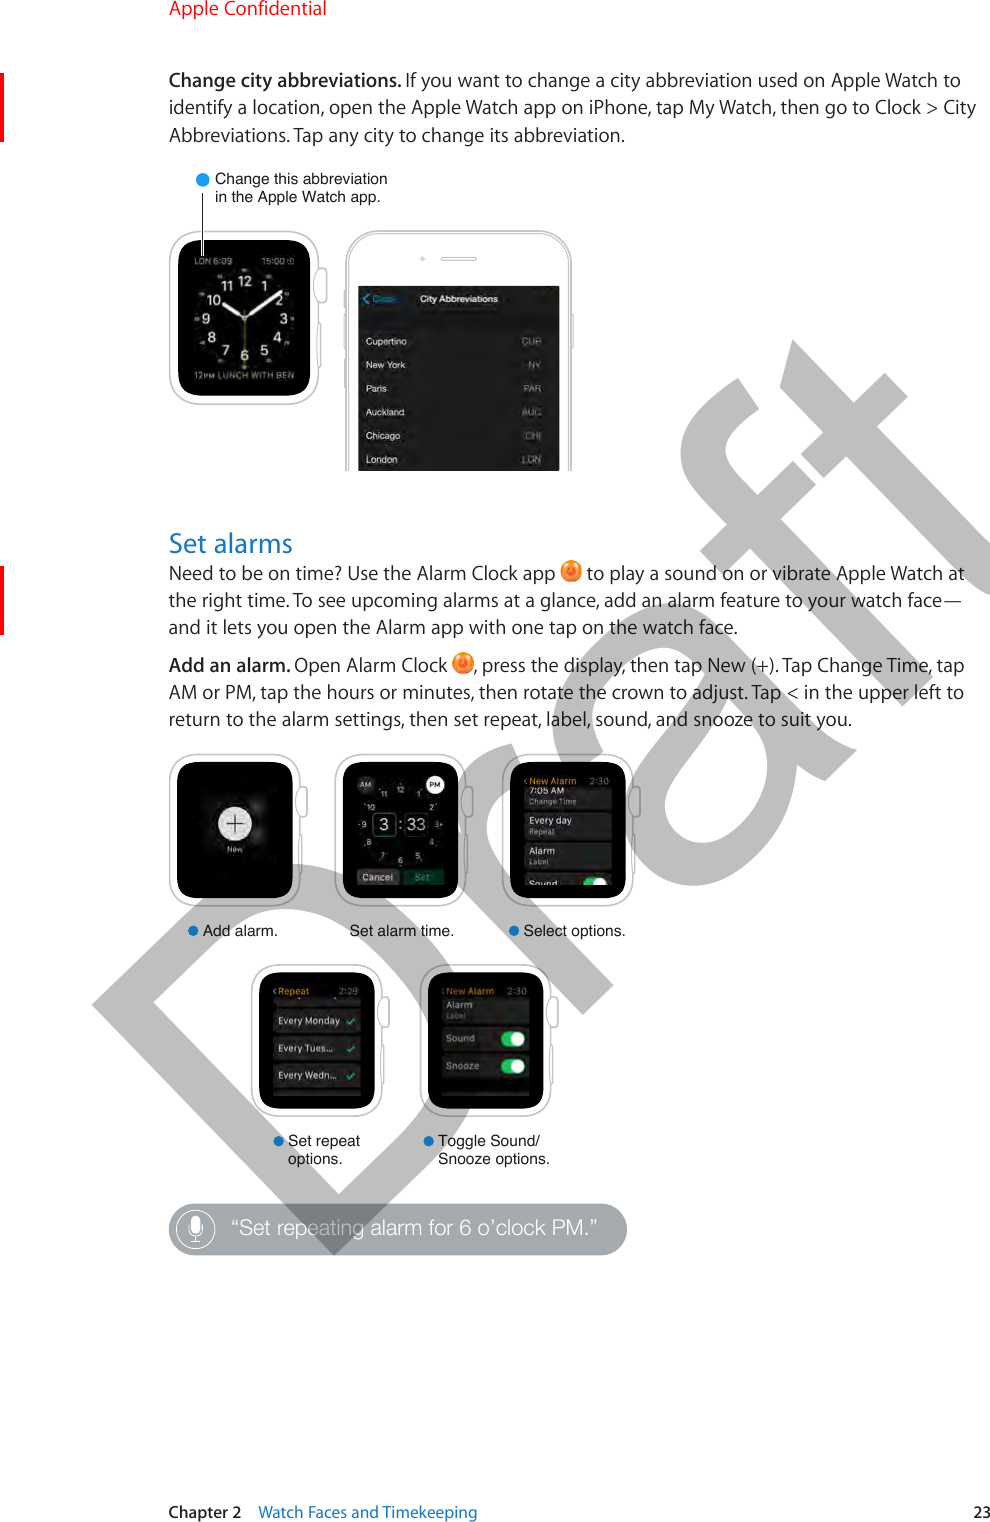 Chapter 2    Watch Faces and Timekeeping  23Change city abbreviations. If you want to change a city abbreviation used on Apple Watch to identify a location, open the Apple Watch app on iPhone, tap My Watch, then go to Clock &gt; City Abbreviations. Tap any city to change its abbreviation.Change this abbreviationin the Apple Watch app.Set alarmsNeed to be on time? Use the Alarm Clock app   to play a sound on or vibrate Apple Watch at the right time. To see upcoming alarms at a glance, add an alarm feature to your watch face—and it lets you open the Alarm app with one tap on the watch face.Add an alarm. Open Alarm Clock  , press the display, then tap New (+). Tap Change Time, tap AM or PM, tap the hours or minutes, then rotate the crown to adjust. Tap &lt; in the upper left to return to the alarm settings, then set repeat, label, sound, and snooze to suit you.Add alarm. Select options.Set alarm time.Set repeatoptions.Toggle Sound/Snooze options.“Set repeating alarm for 6 o’clock PM.”Apple Confidential  100% resize factorDraft